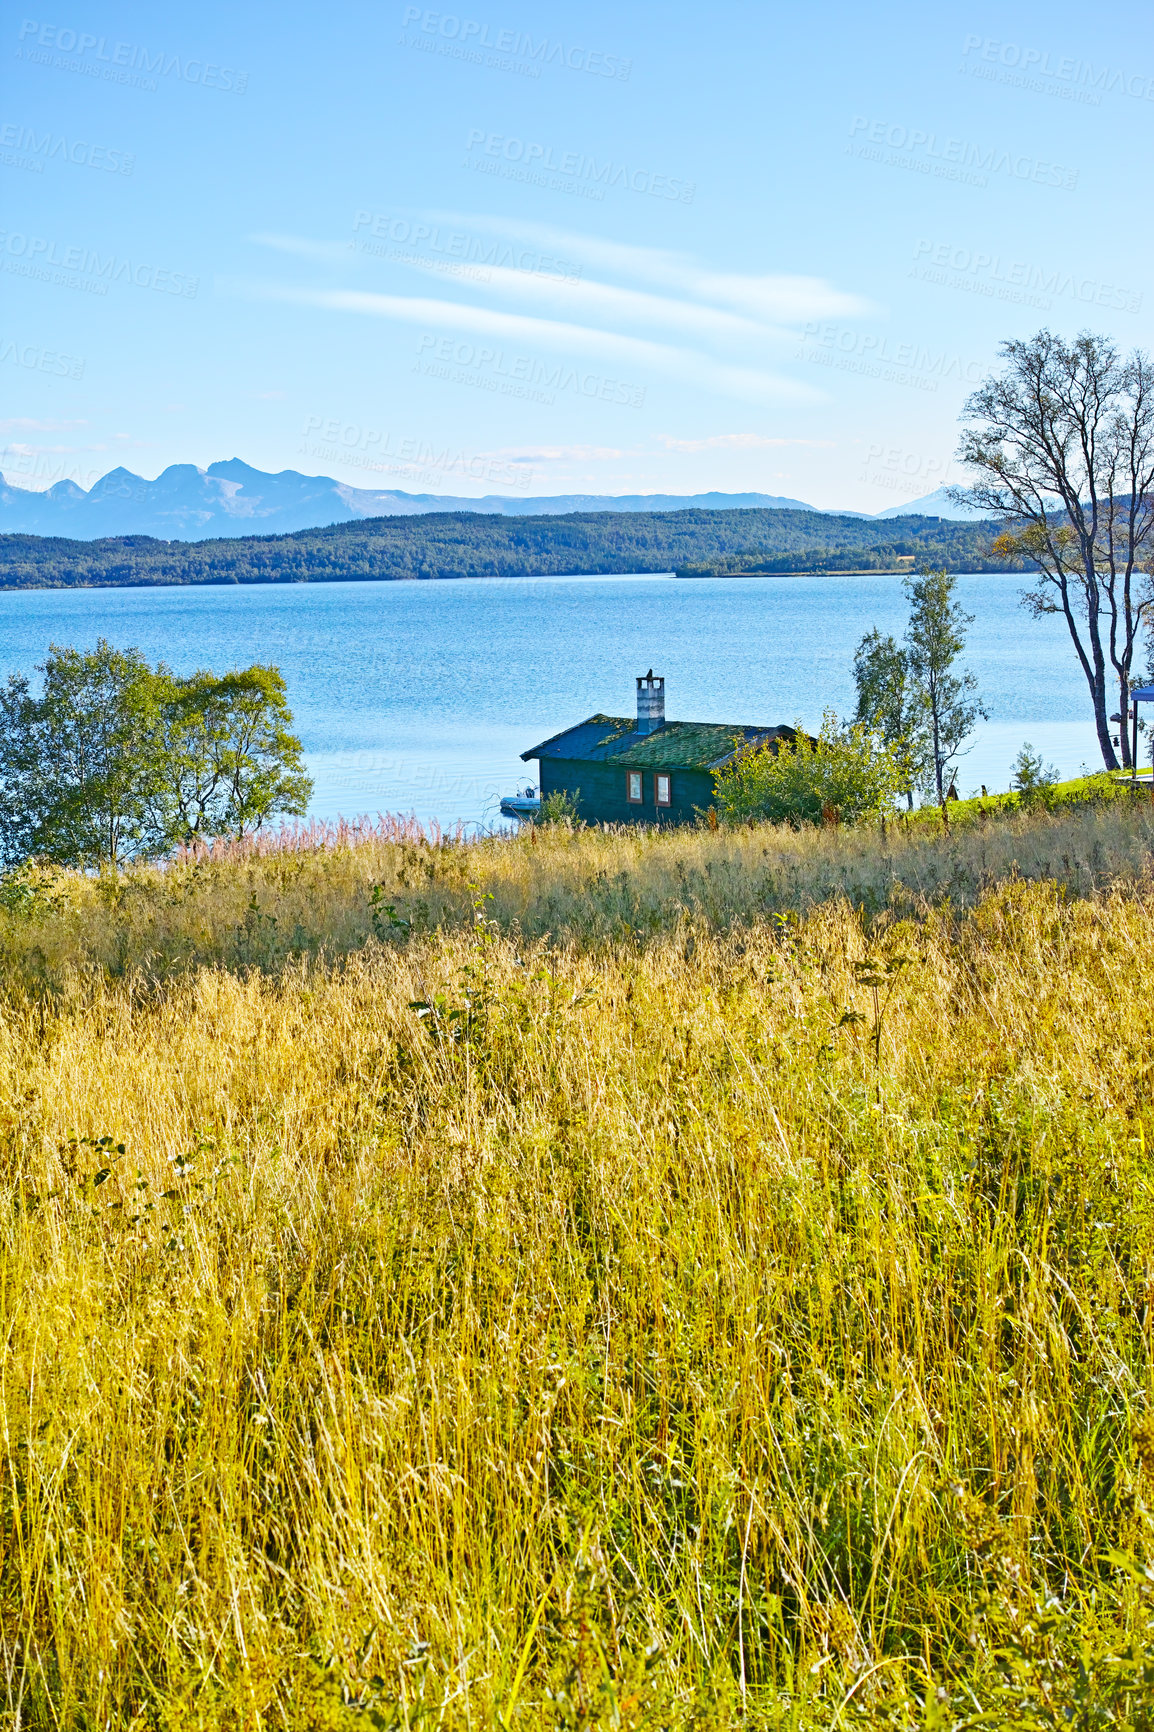 Buy stock photo Scenic view of uncultivated grass and lake house in a remote countryside. Wild flora and trees around a small wooden cabin and bay of water in Norway. Landscape of a river, ocean or sea with blue sky